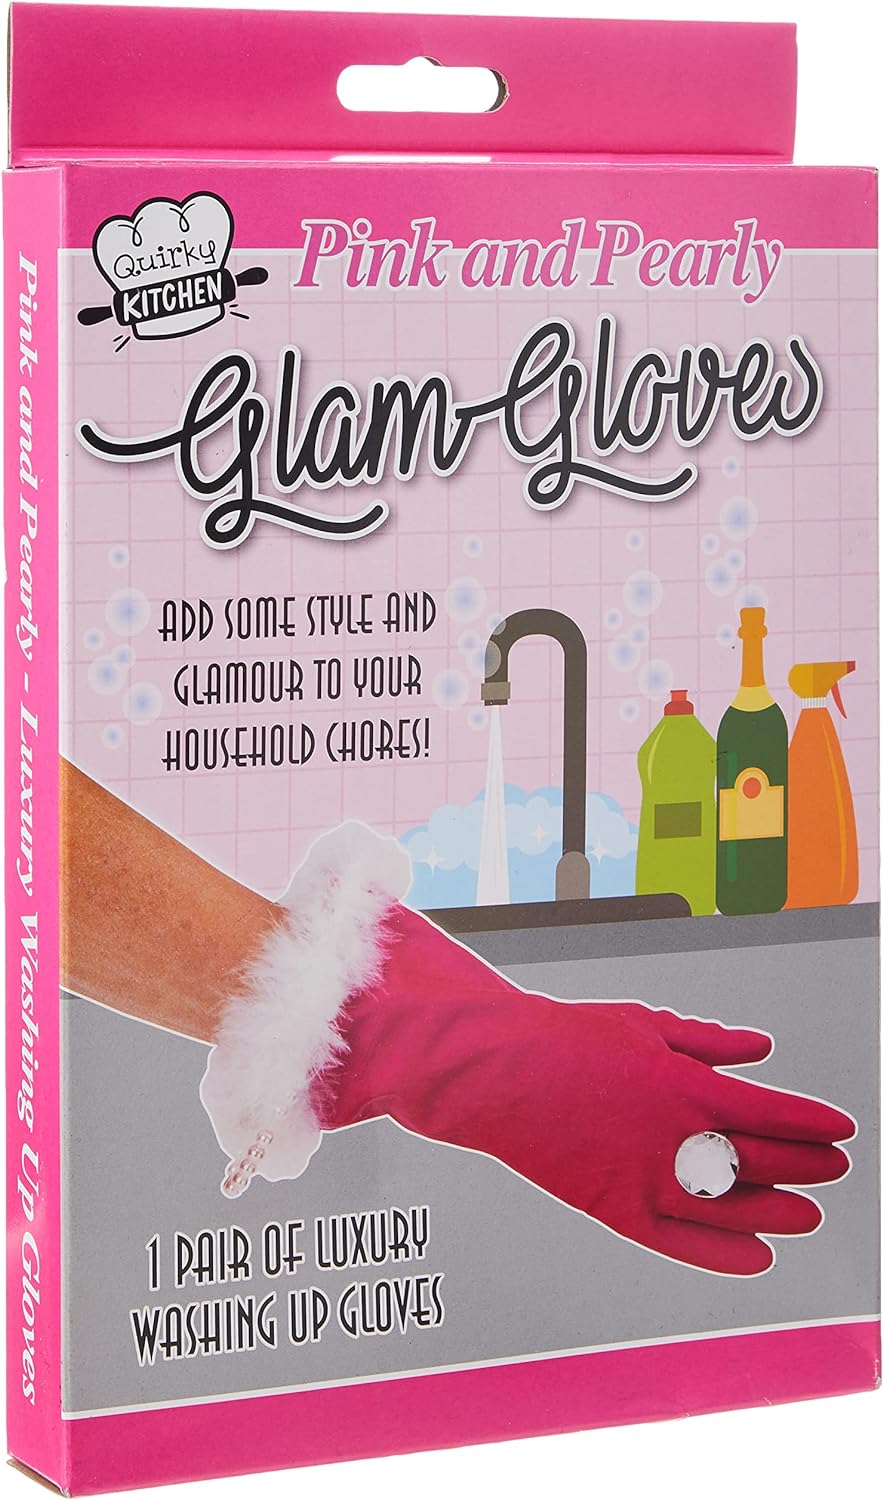 Diabolical Gifts DP0985 Pink & Pearly Glamorous Pink and Pearly Washing-Up Gloves Secret Santa Gift People, One Size (Pack of 1)